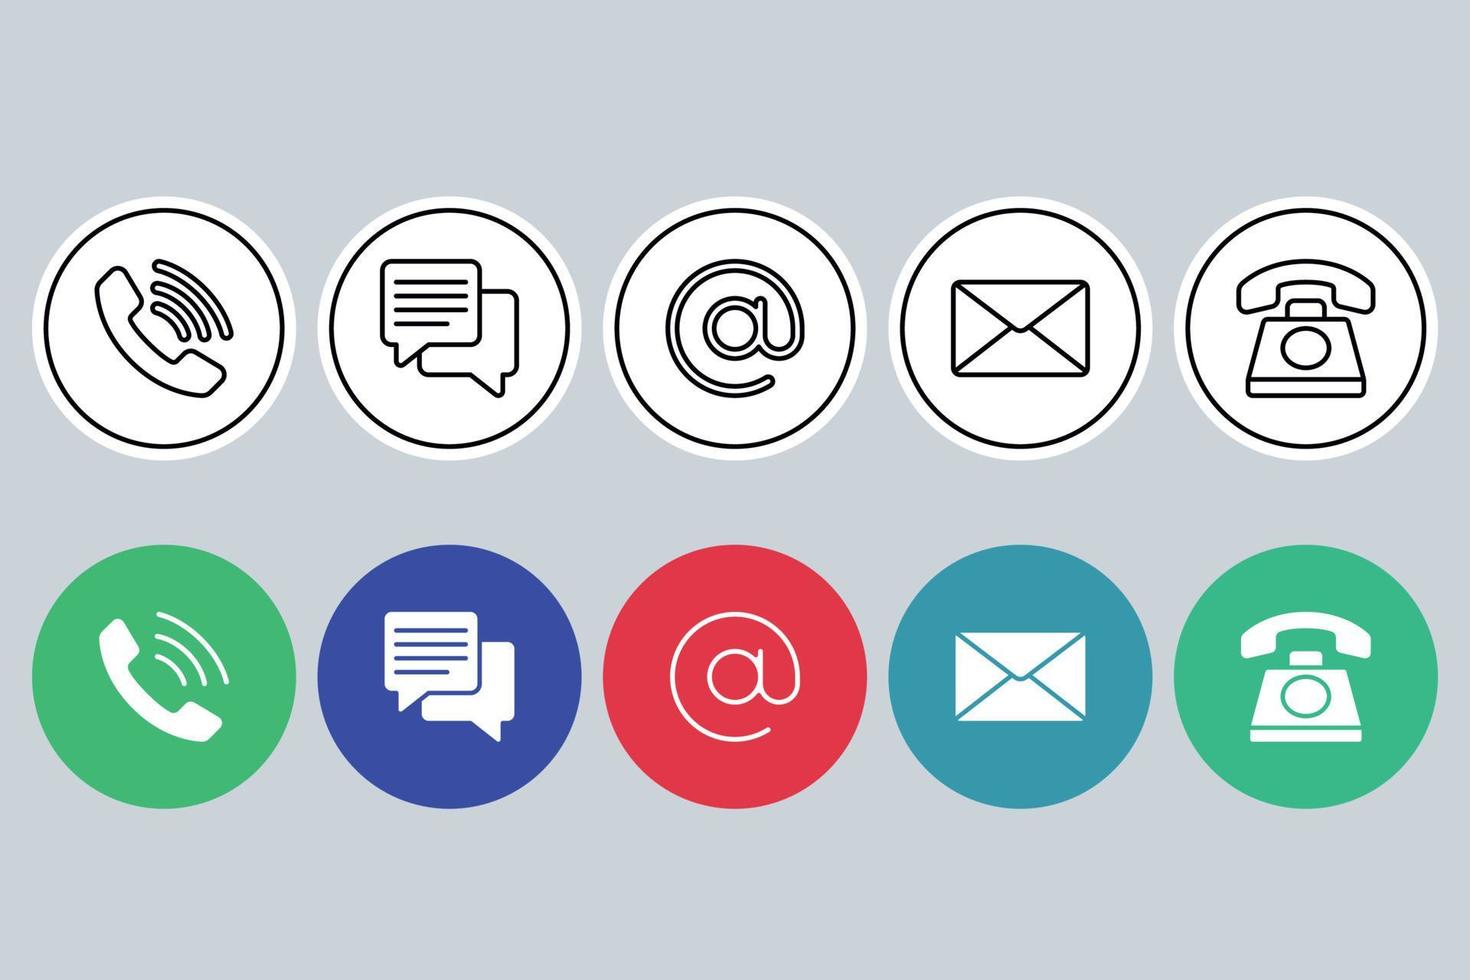 5 Contact Us Buttons In Line And Flat vector